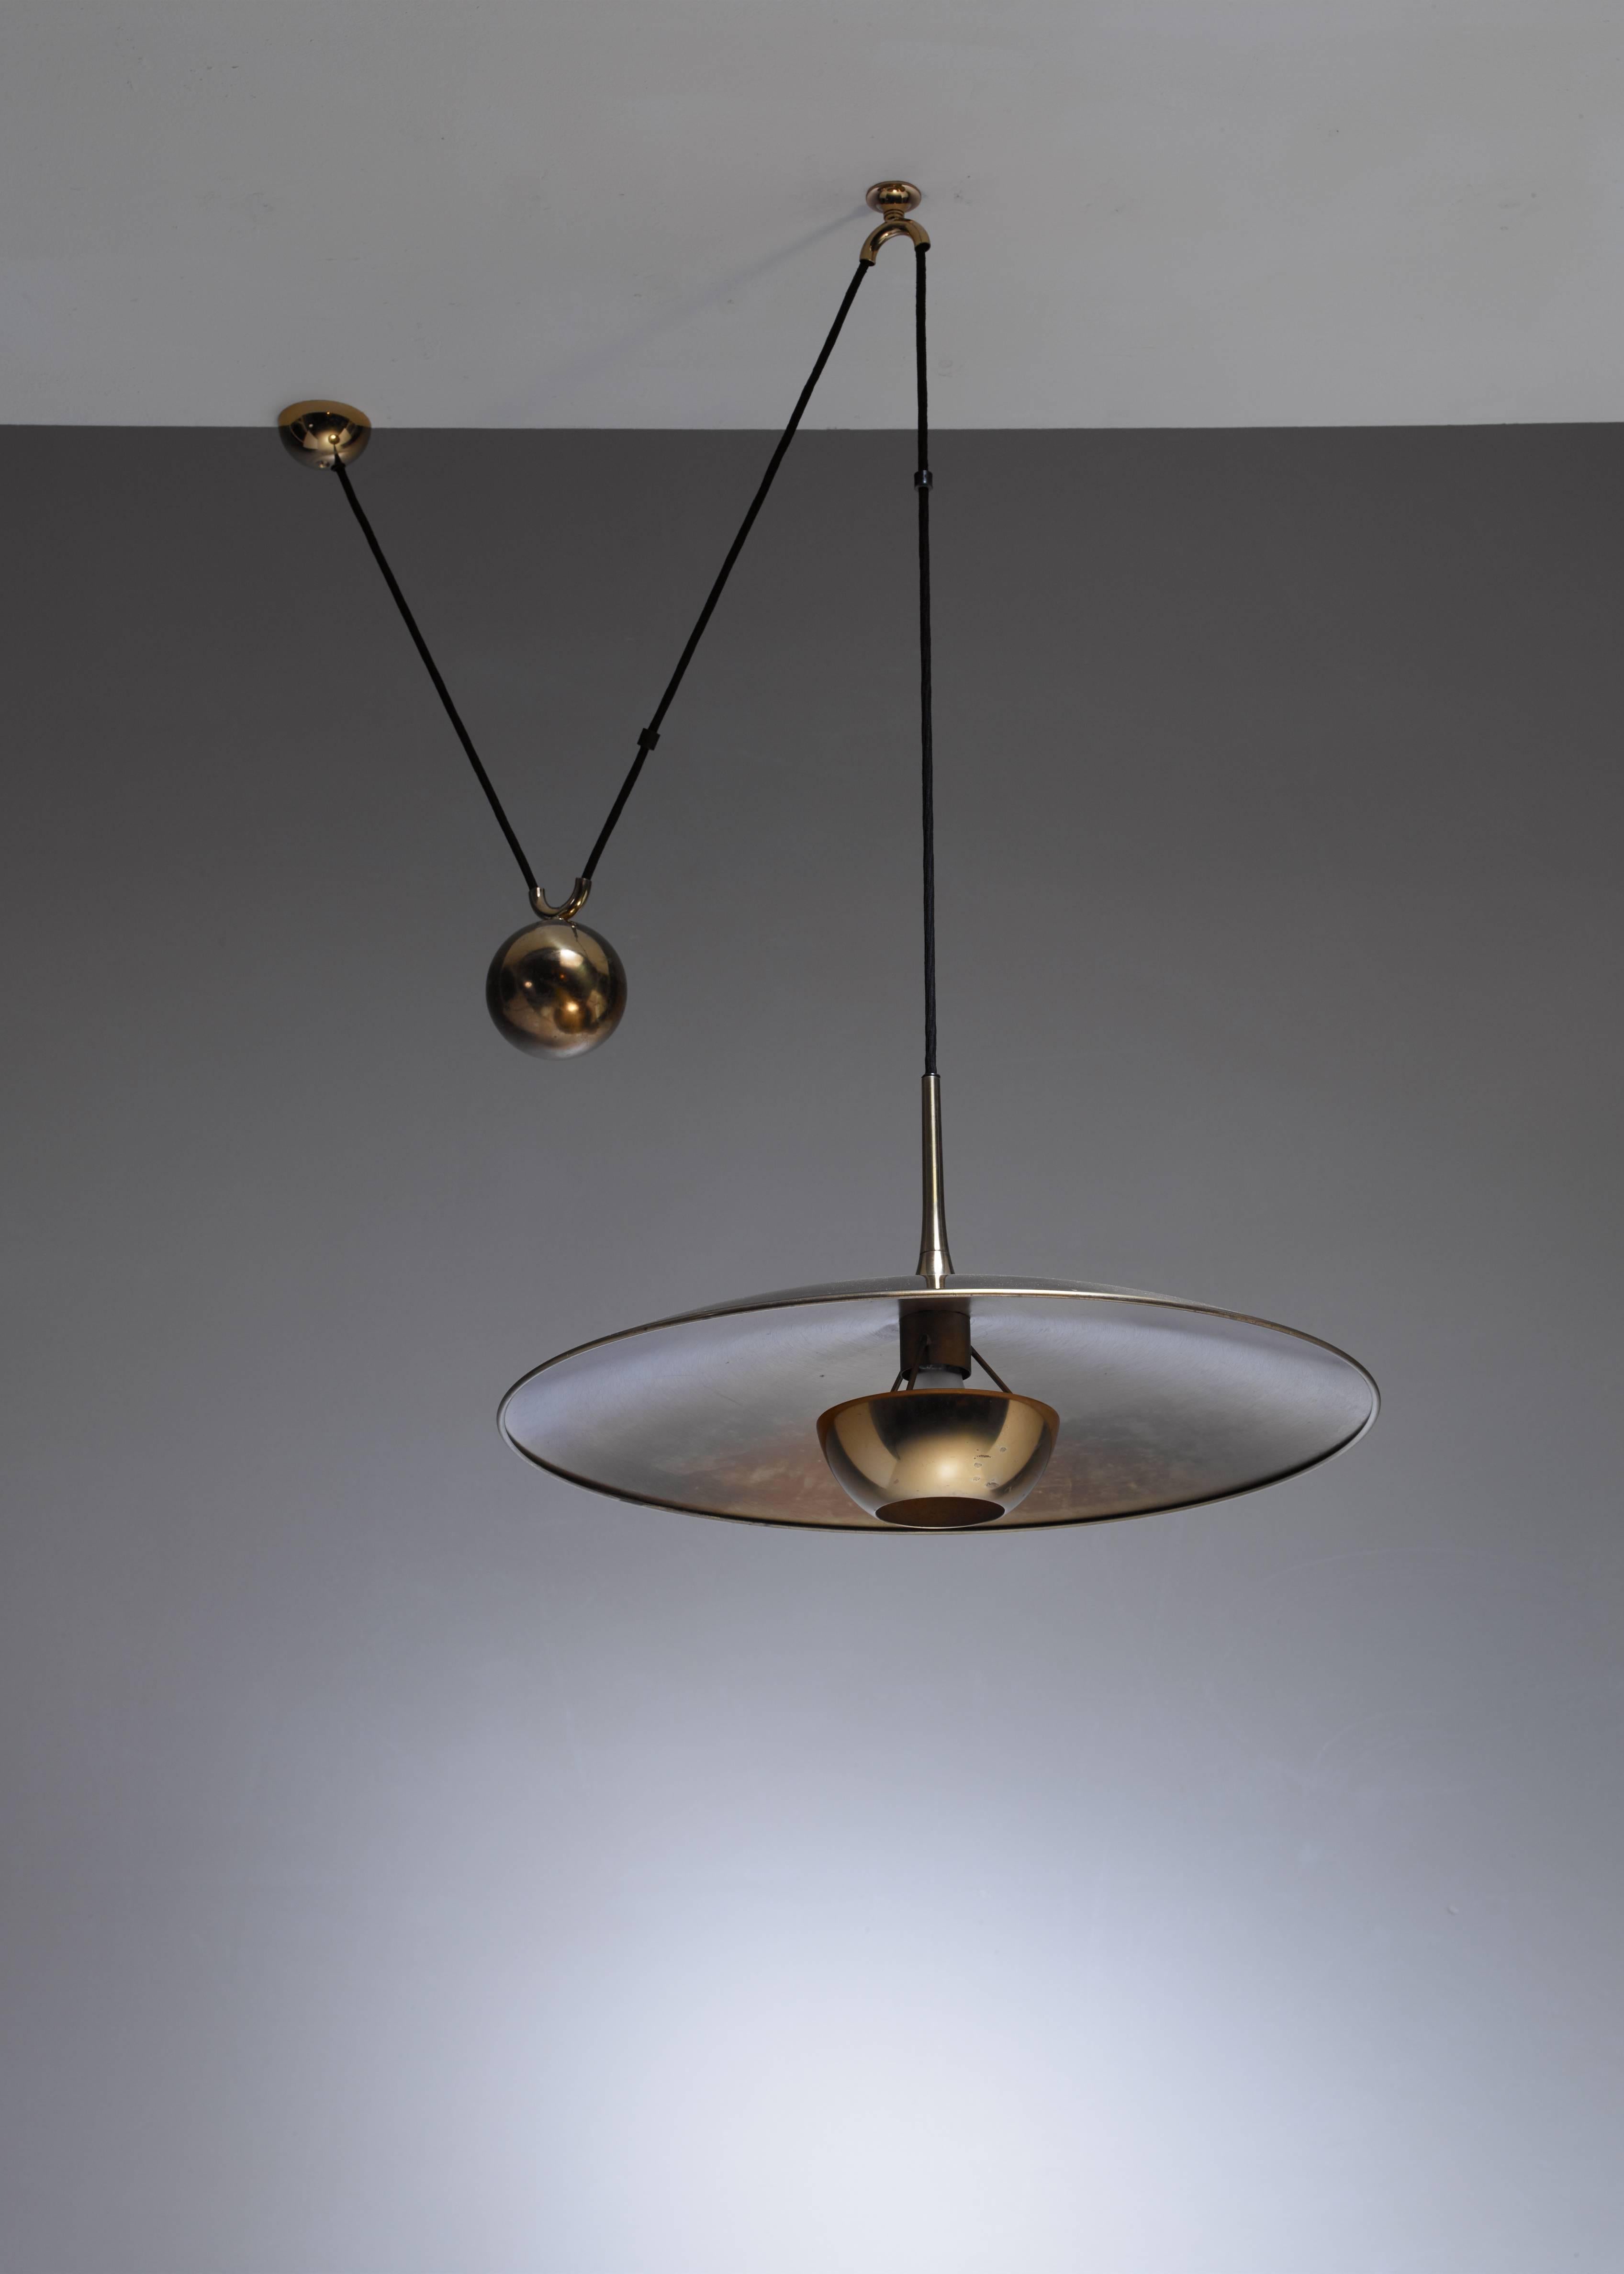 Mid-Century Modern Florian Schulz Brass Onos Pendant with Counterweight, Germany, 1970s